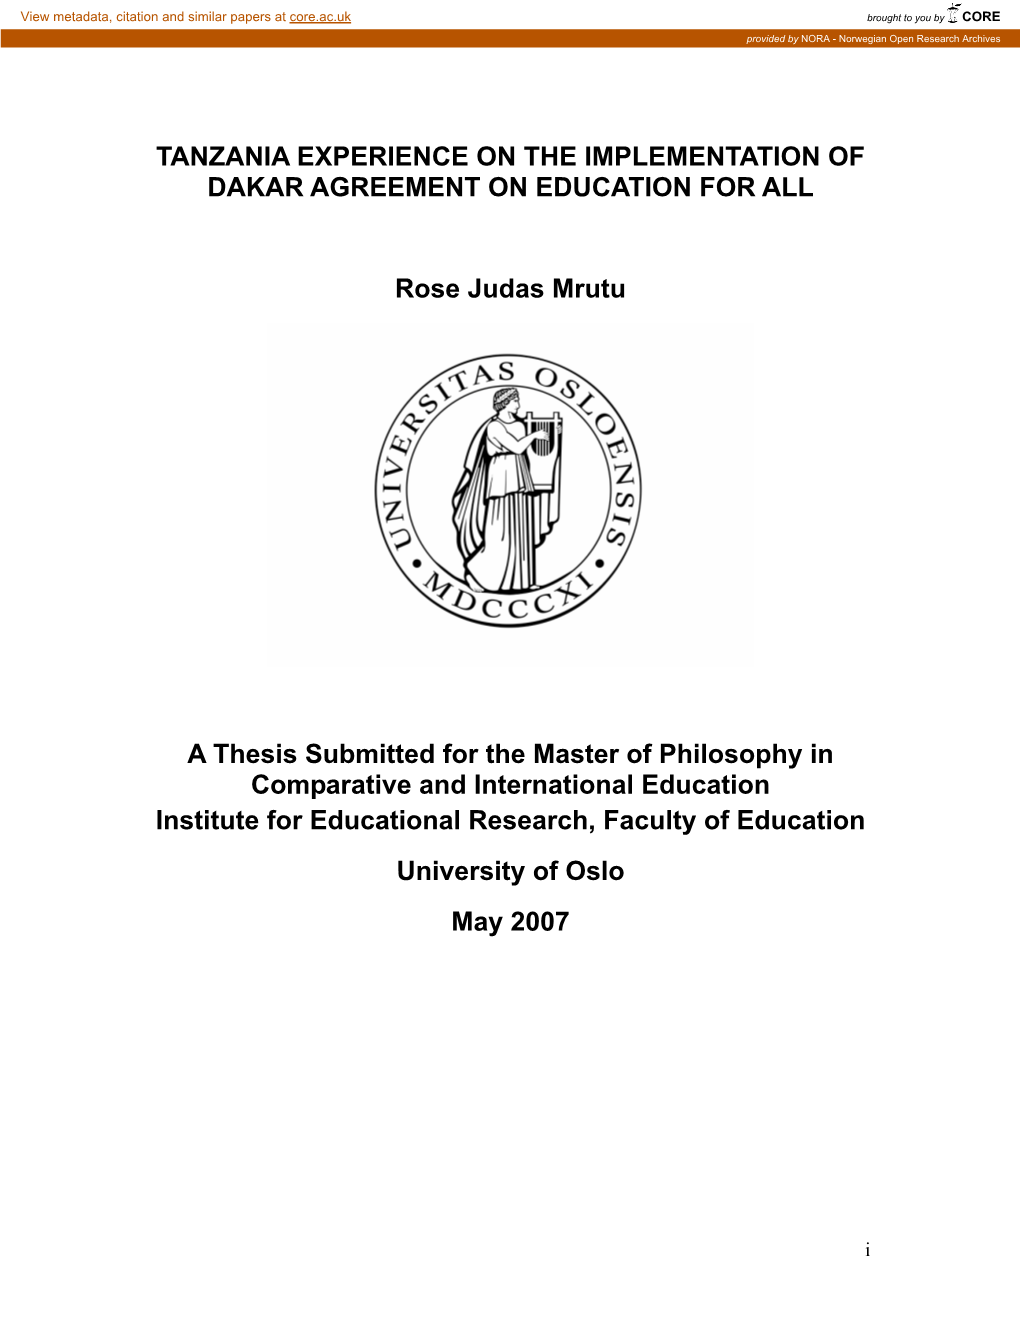 Tanzania Experience on the Implementation of Dakar Agreement on Education for All